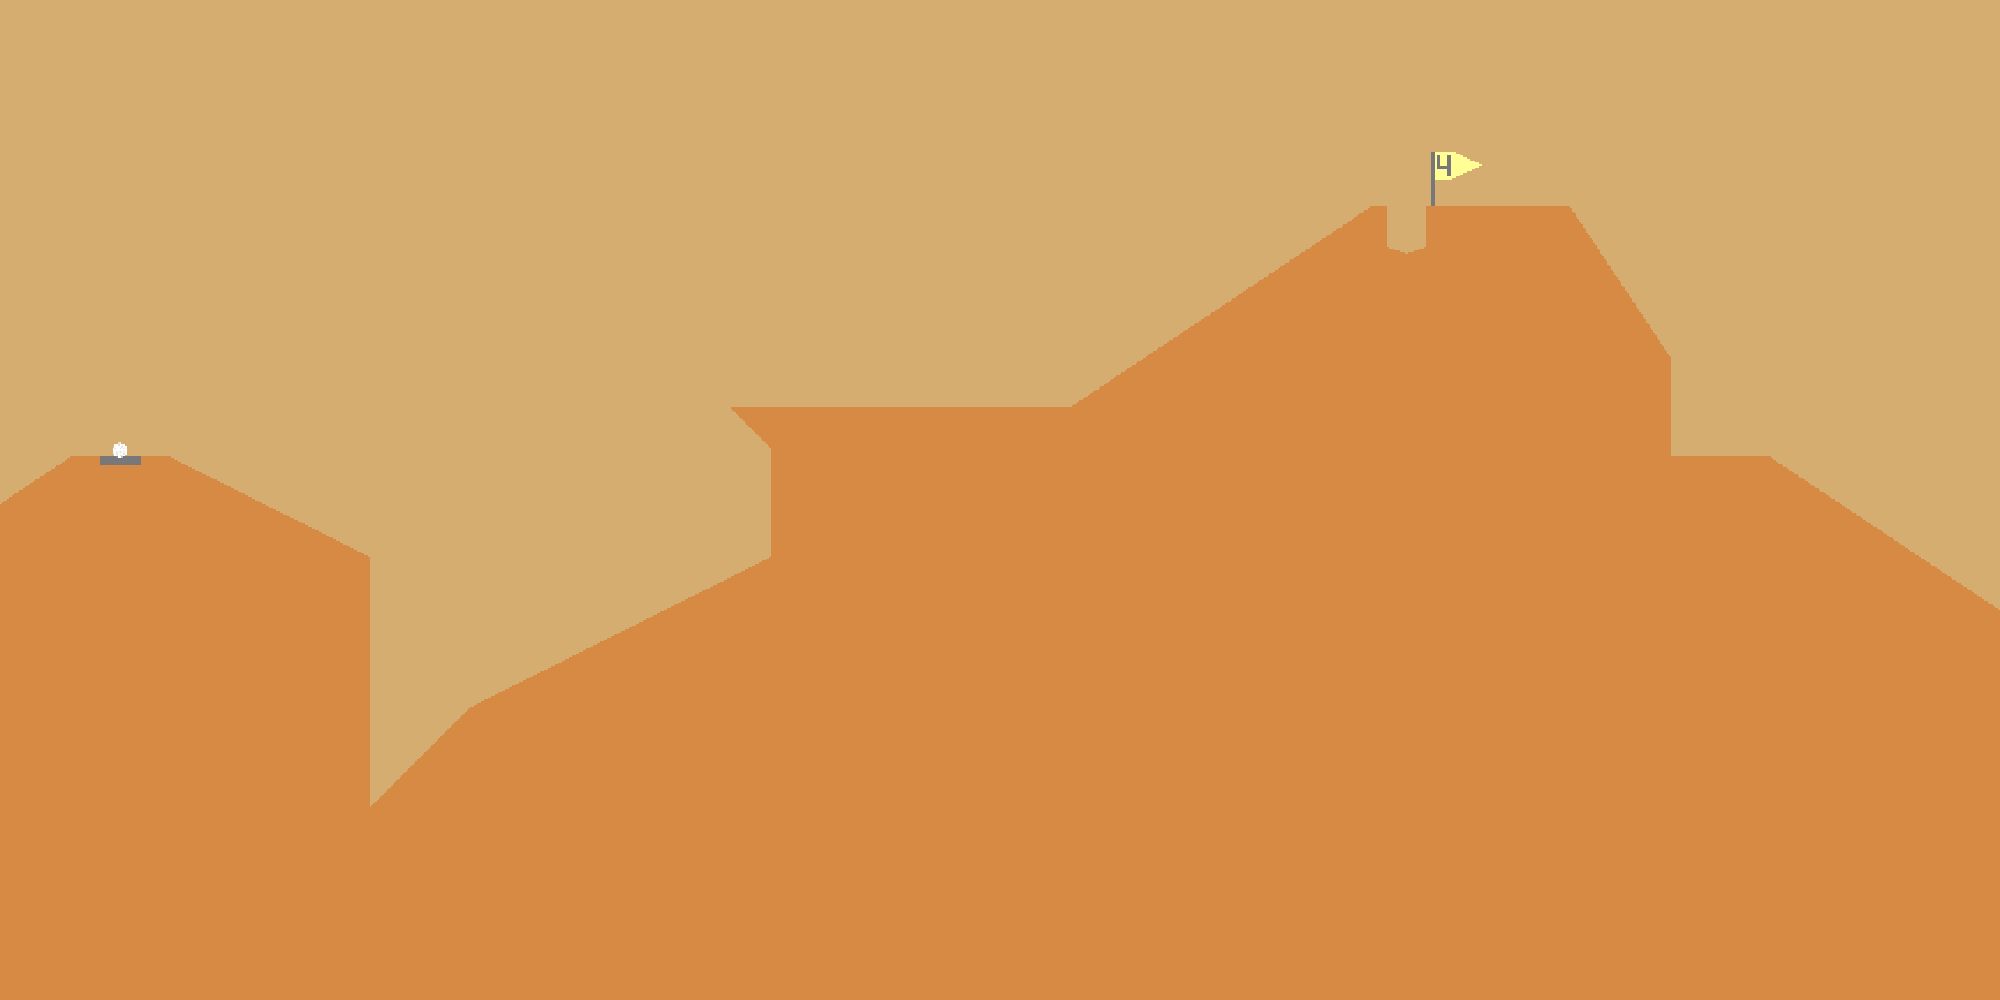 desert golfing gameplay with ball on left and goal on right with number 4 on flag